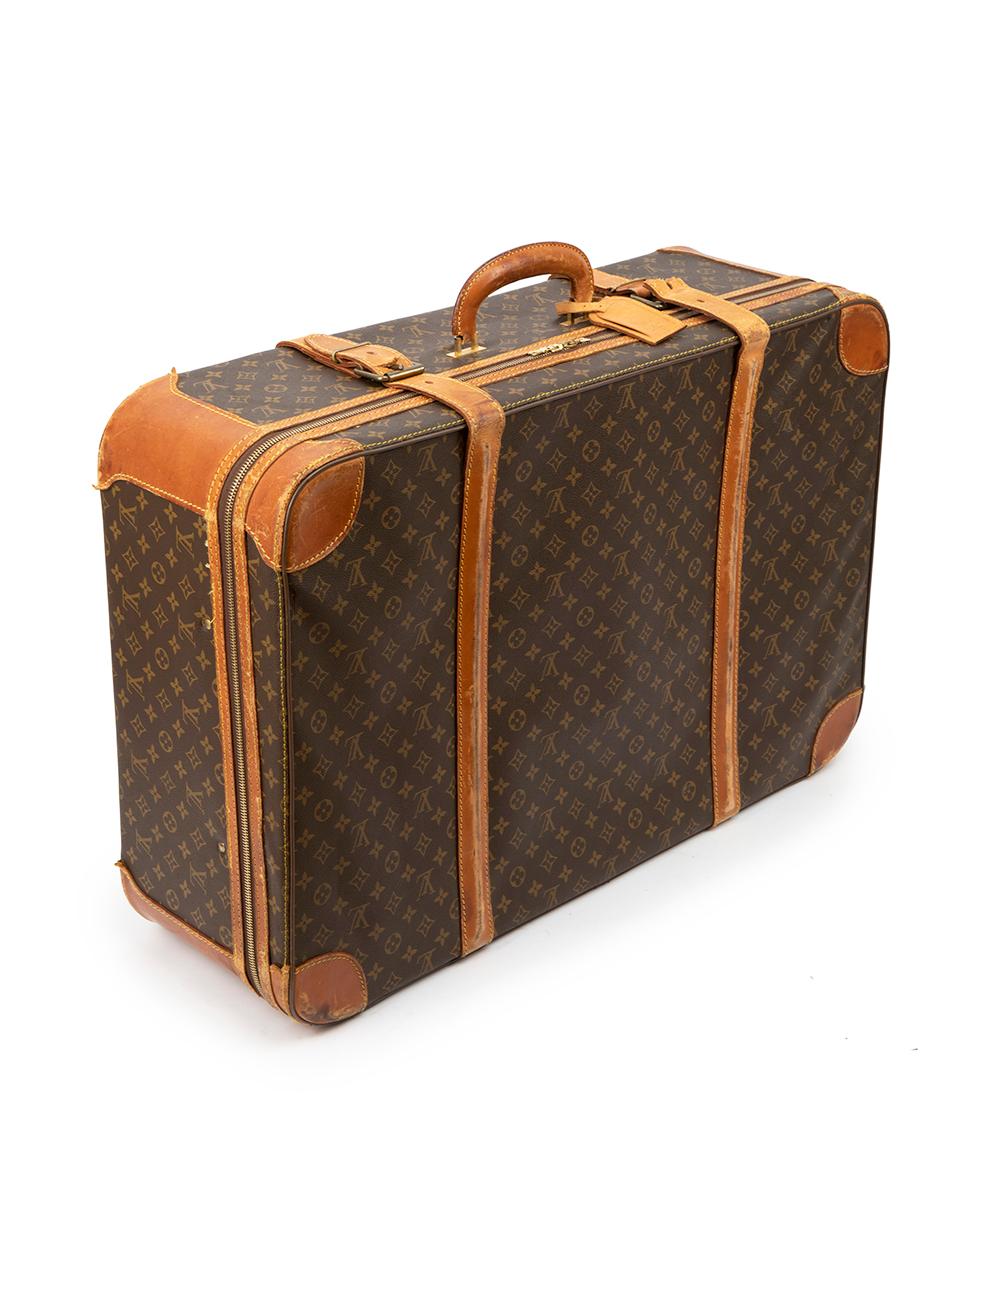 CONDITION is Good. General wear to suitcase is evident. Moderate signs of wear seen throughout to the leather at the sides, front and back with discoloured marks, abrasions and scratches, as well as one strap having broken. The stitching at the